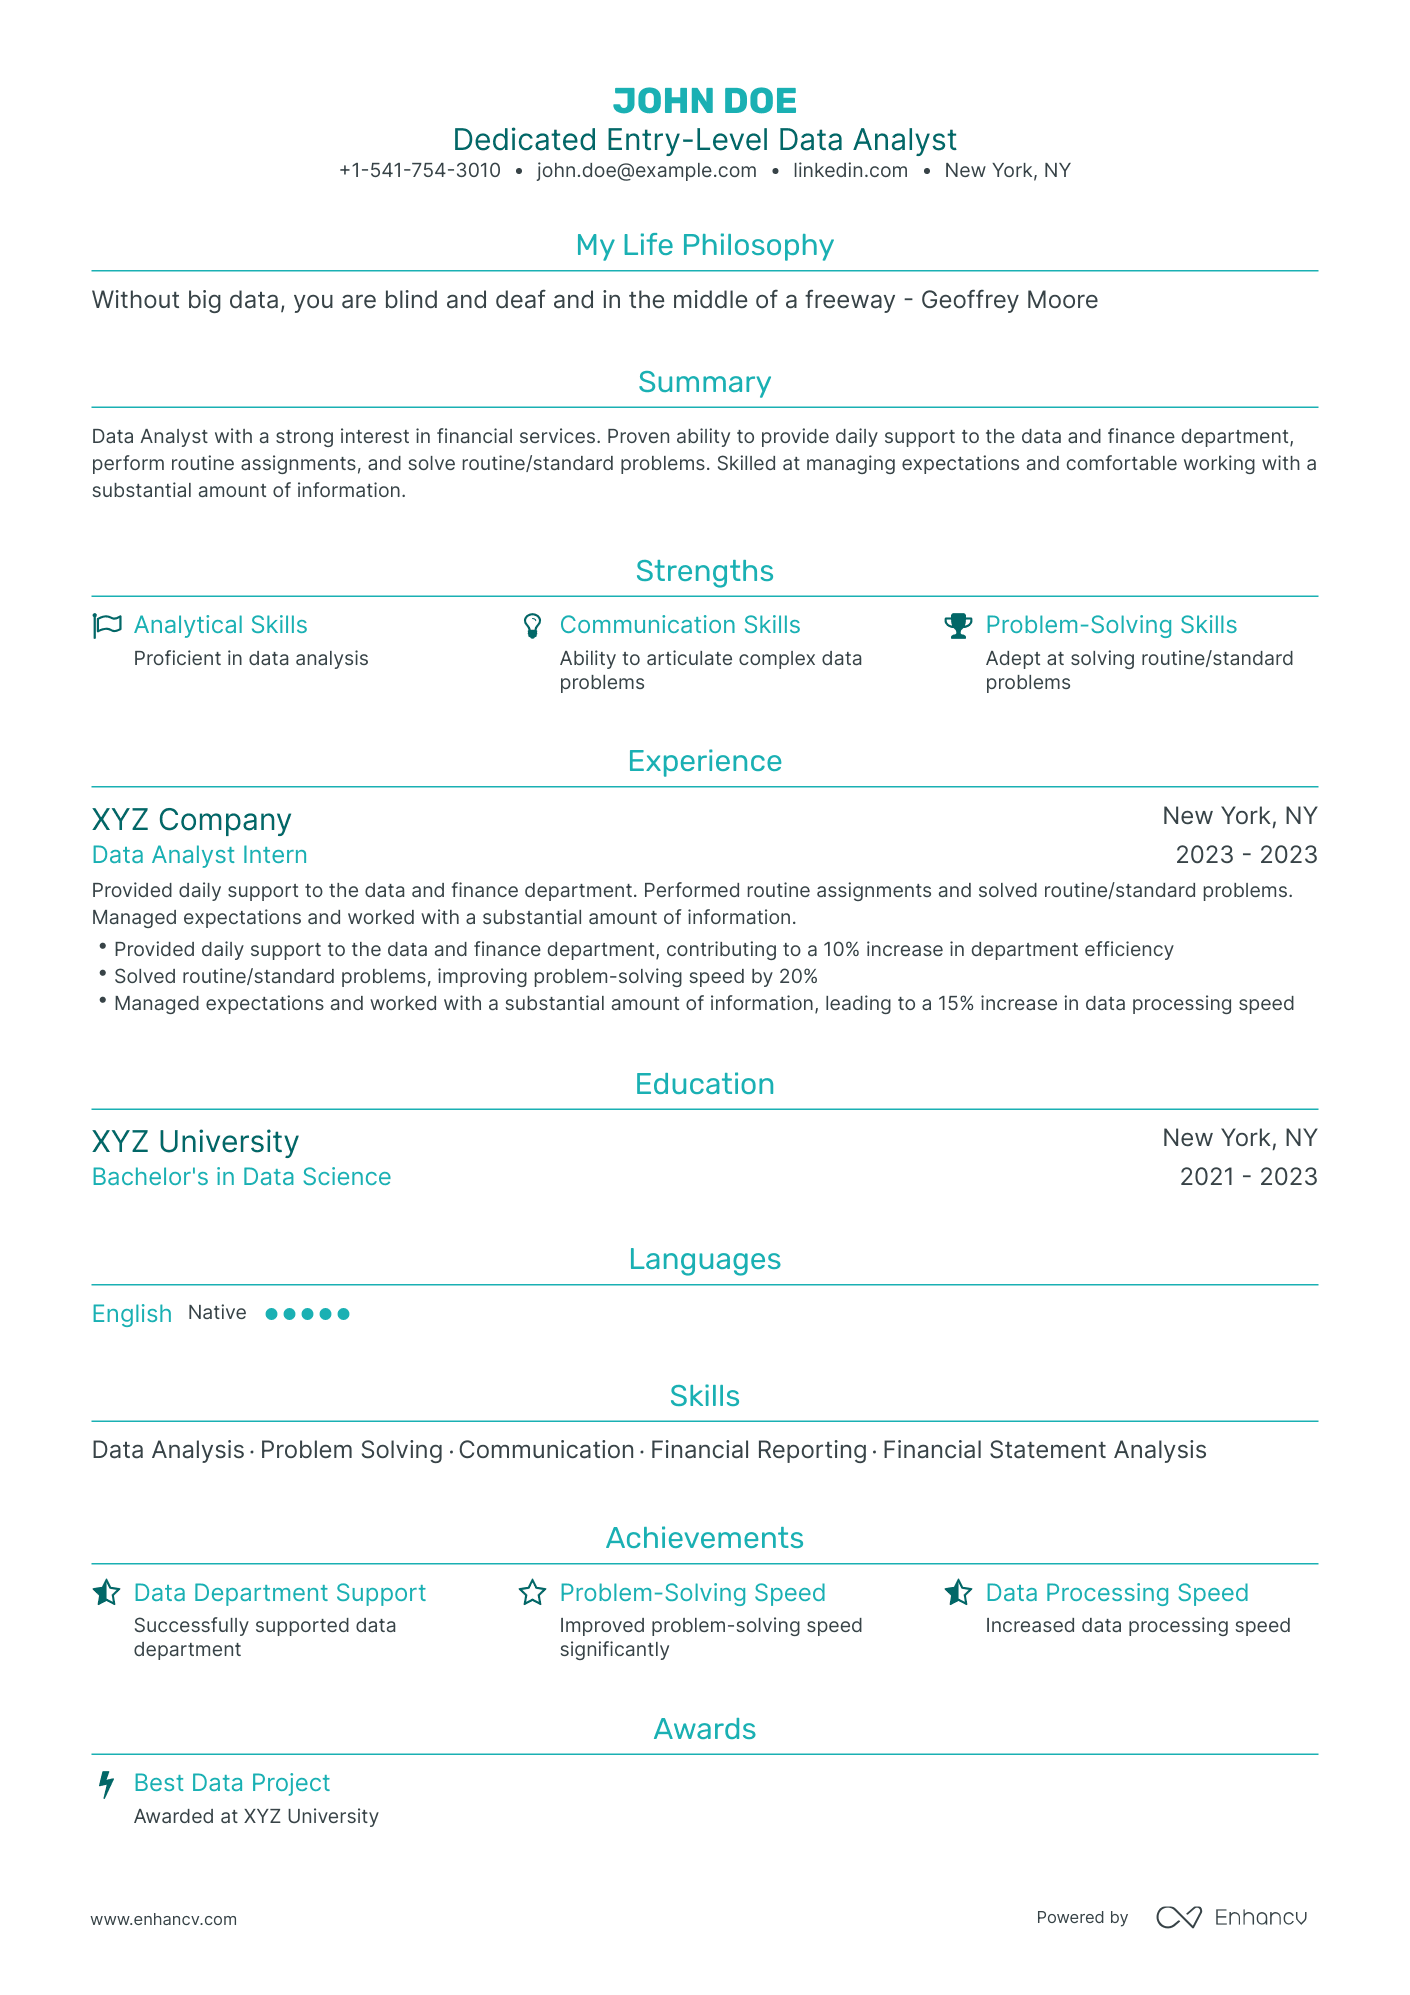 Traditional Data Analyst Entry Level Resume Template